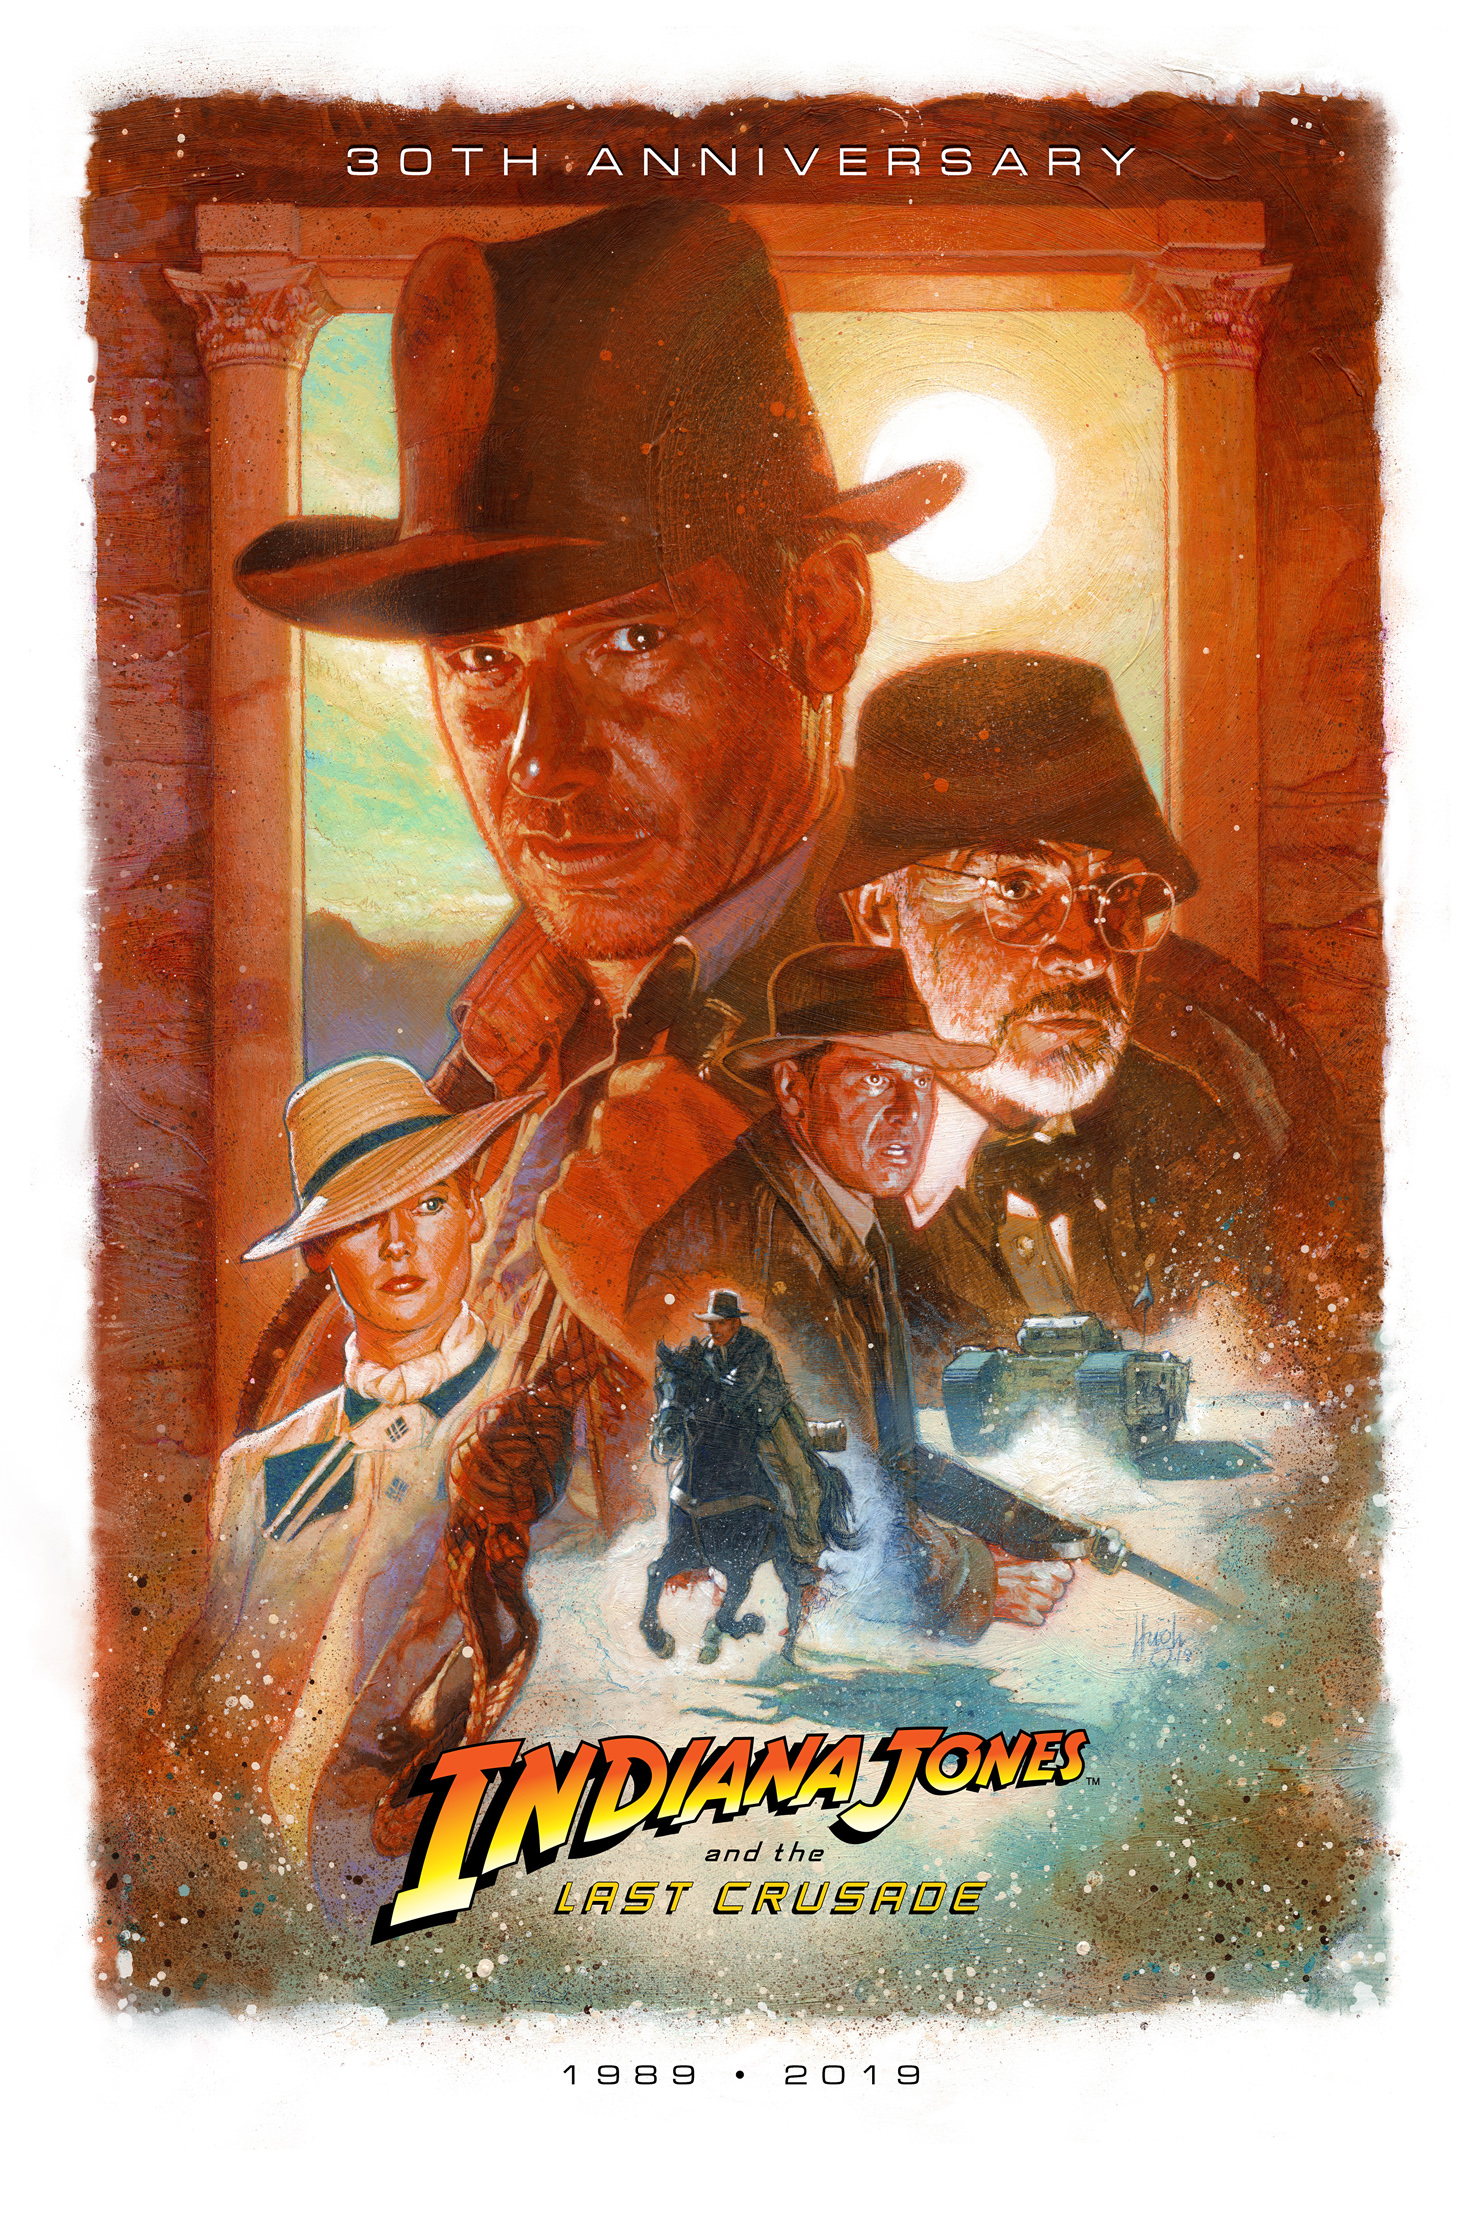 Jones and last indiana crusade the Download Indiana